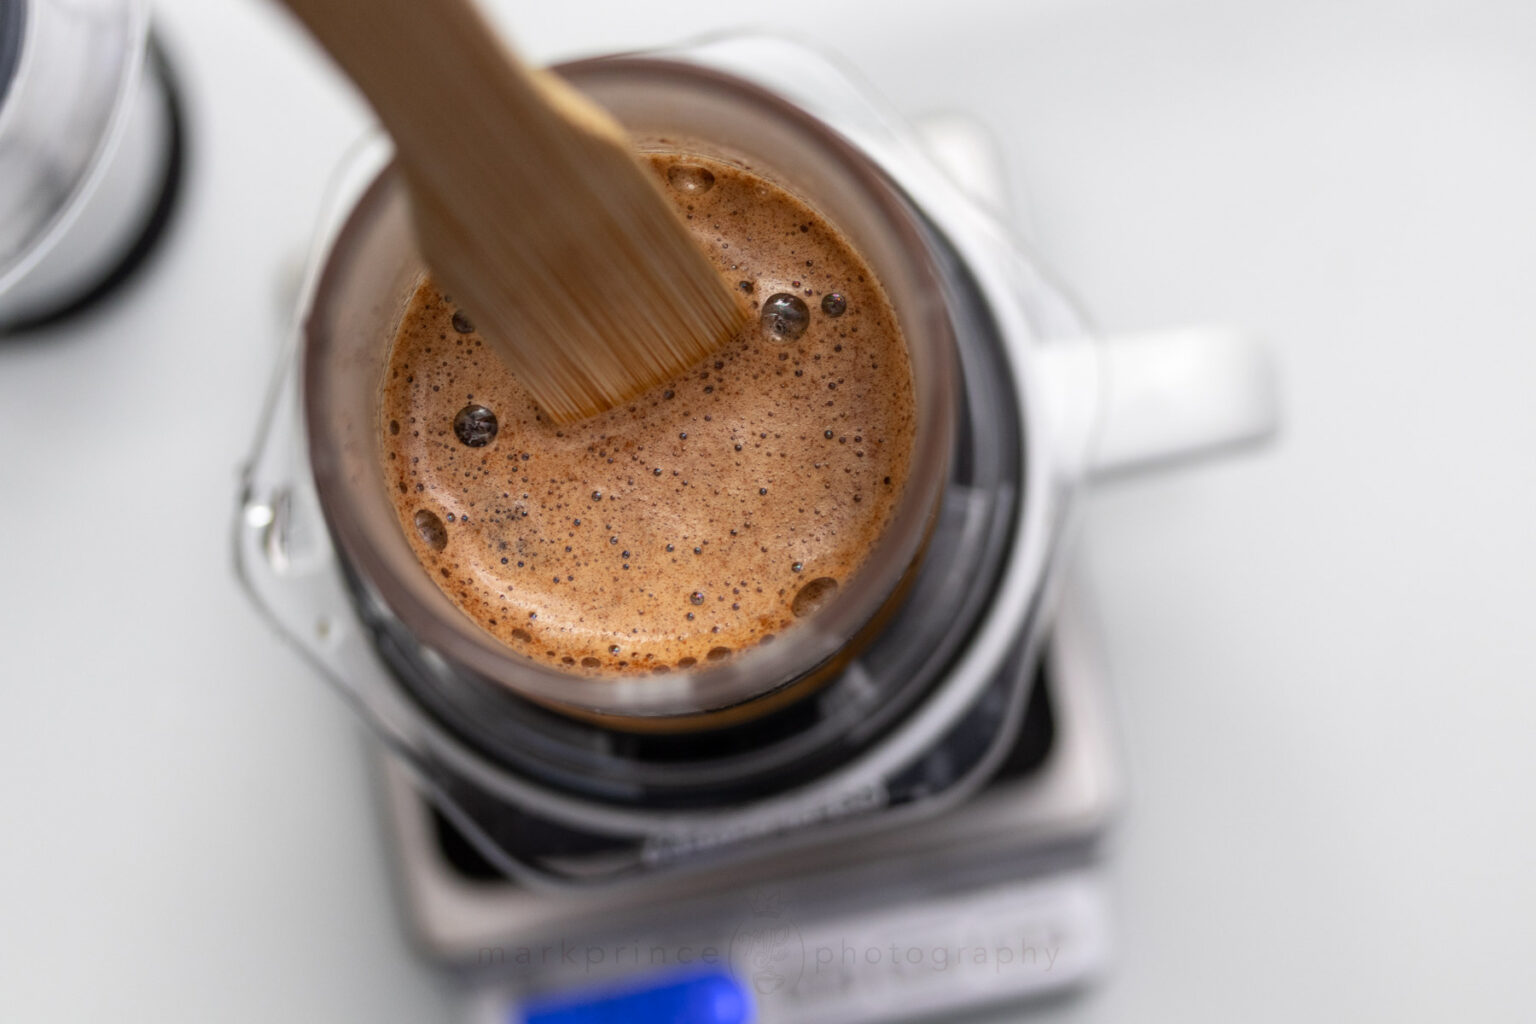 Brewing with the Clear AeroPress